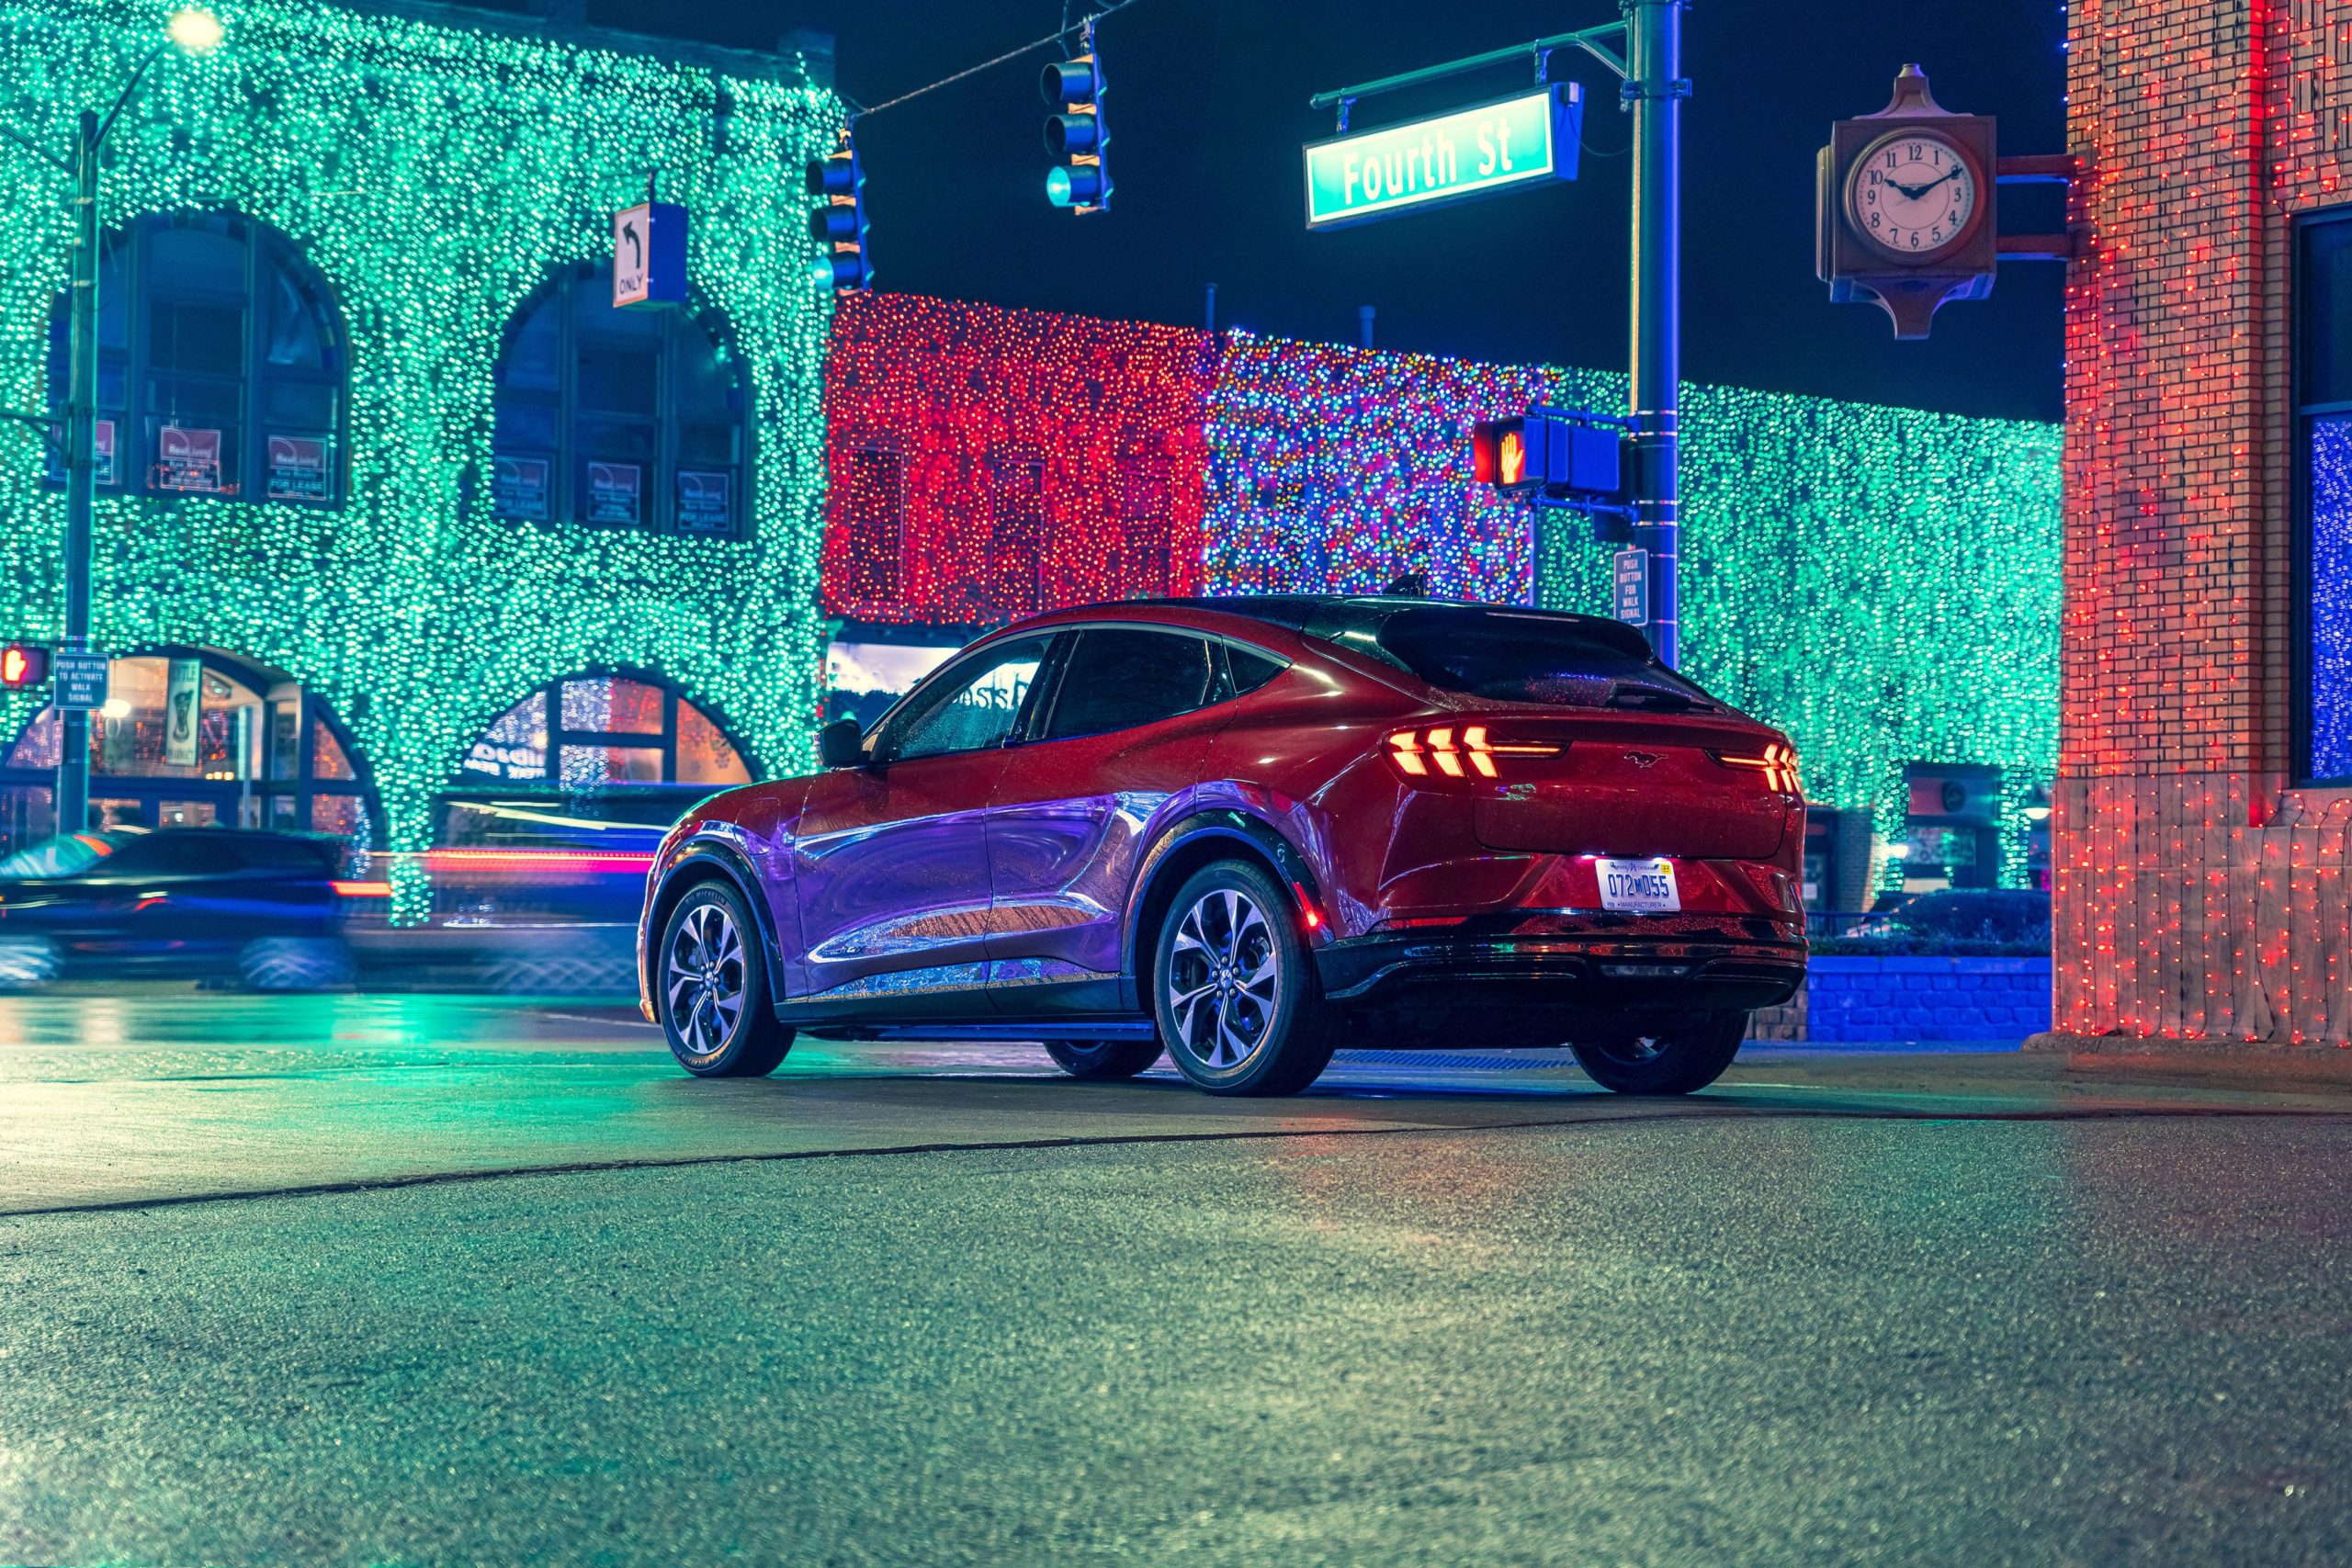 12-Volt Batteries in Some 2021 Ford Mustang Mach-Es Are Dying, Leaving Owners Stranded